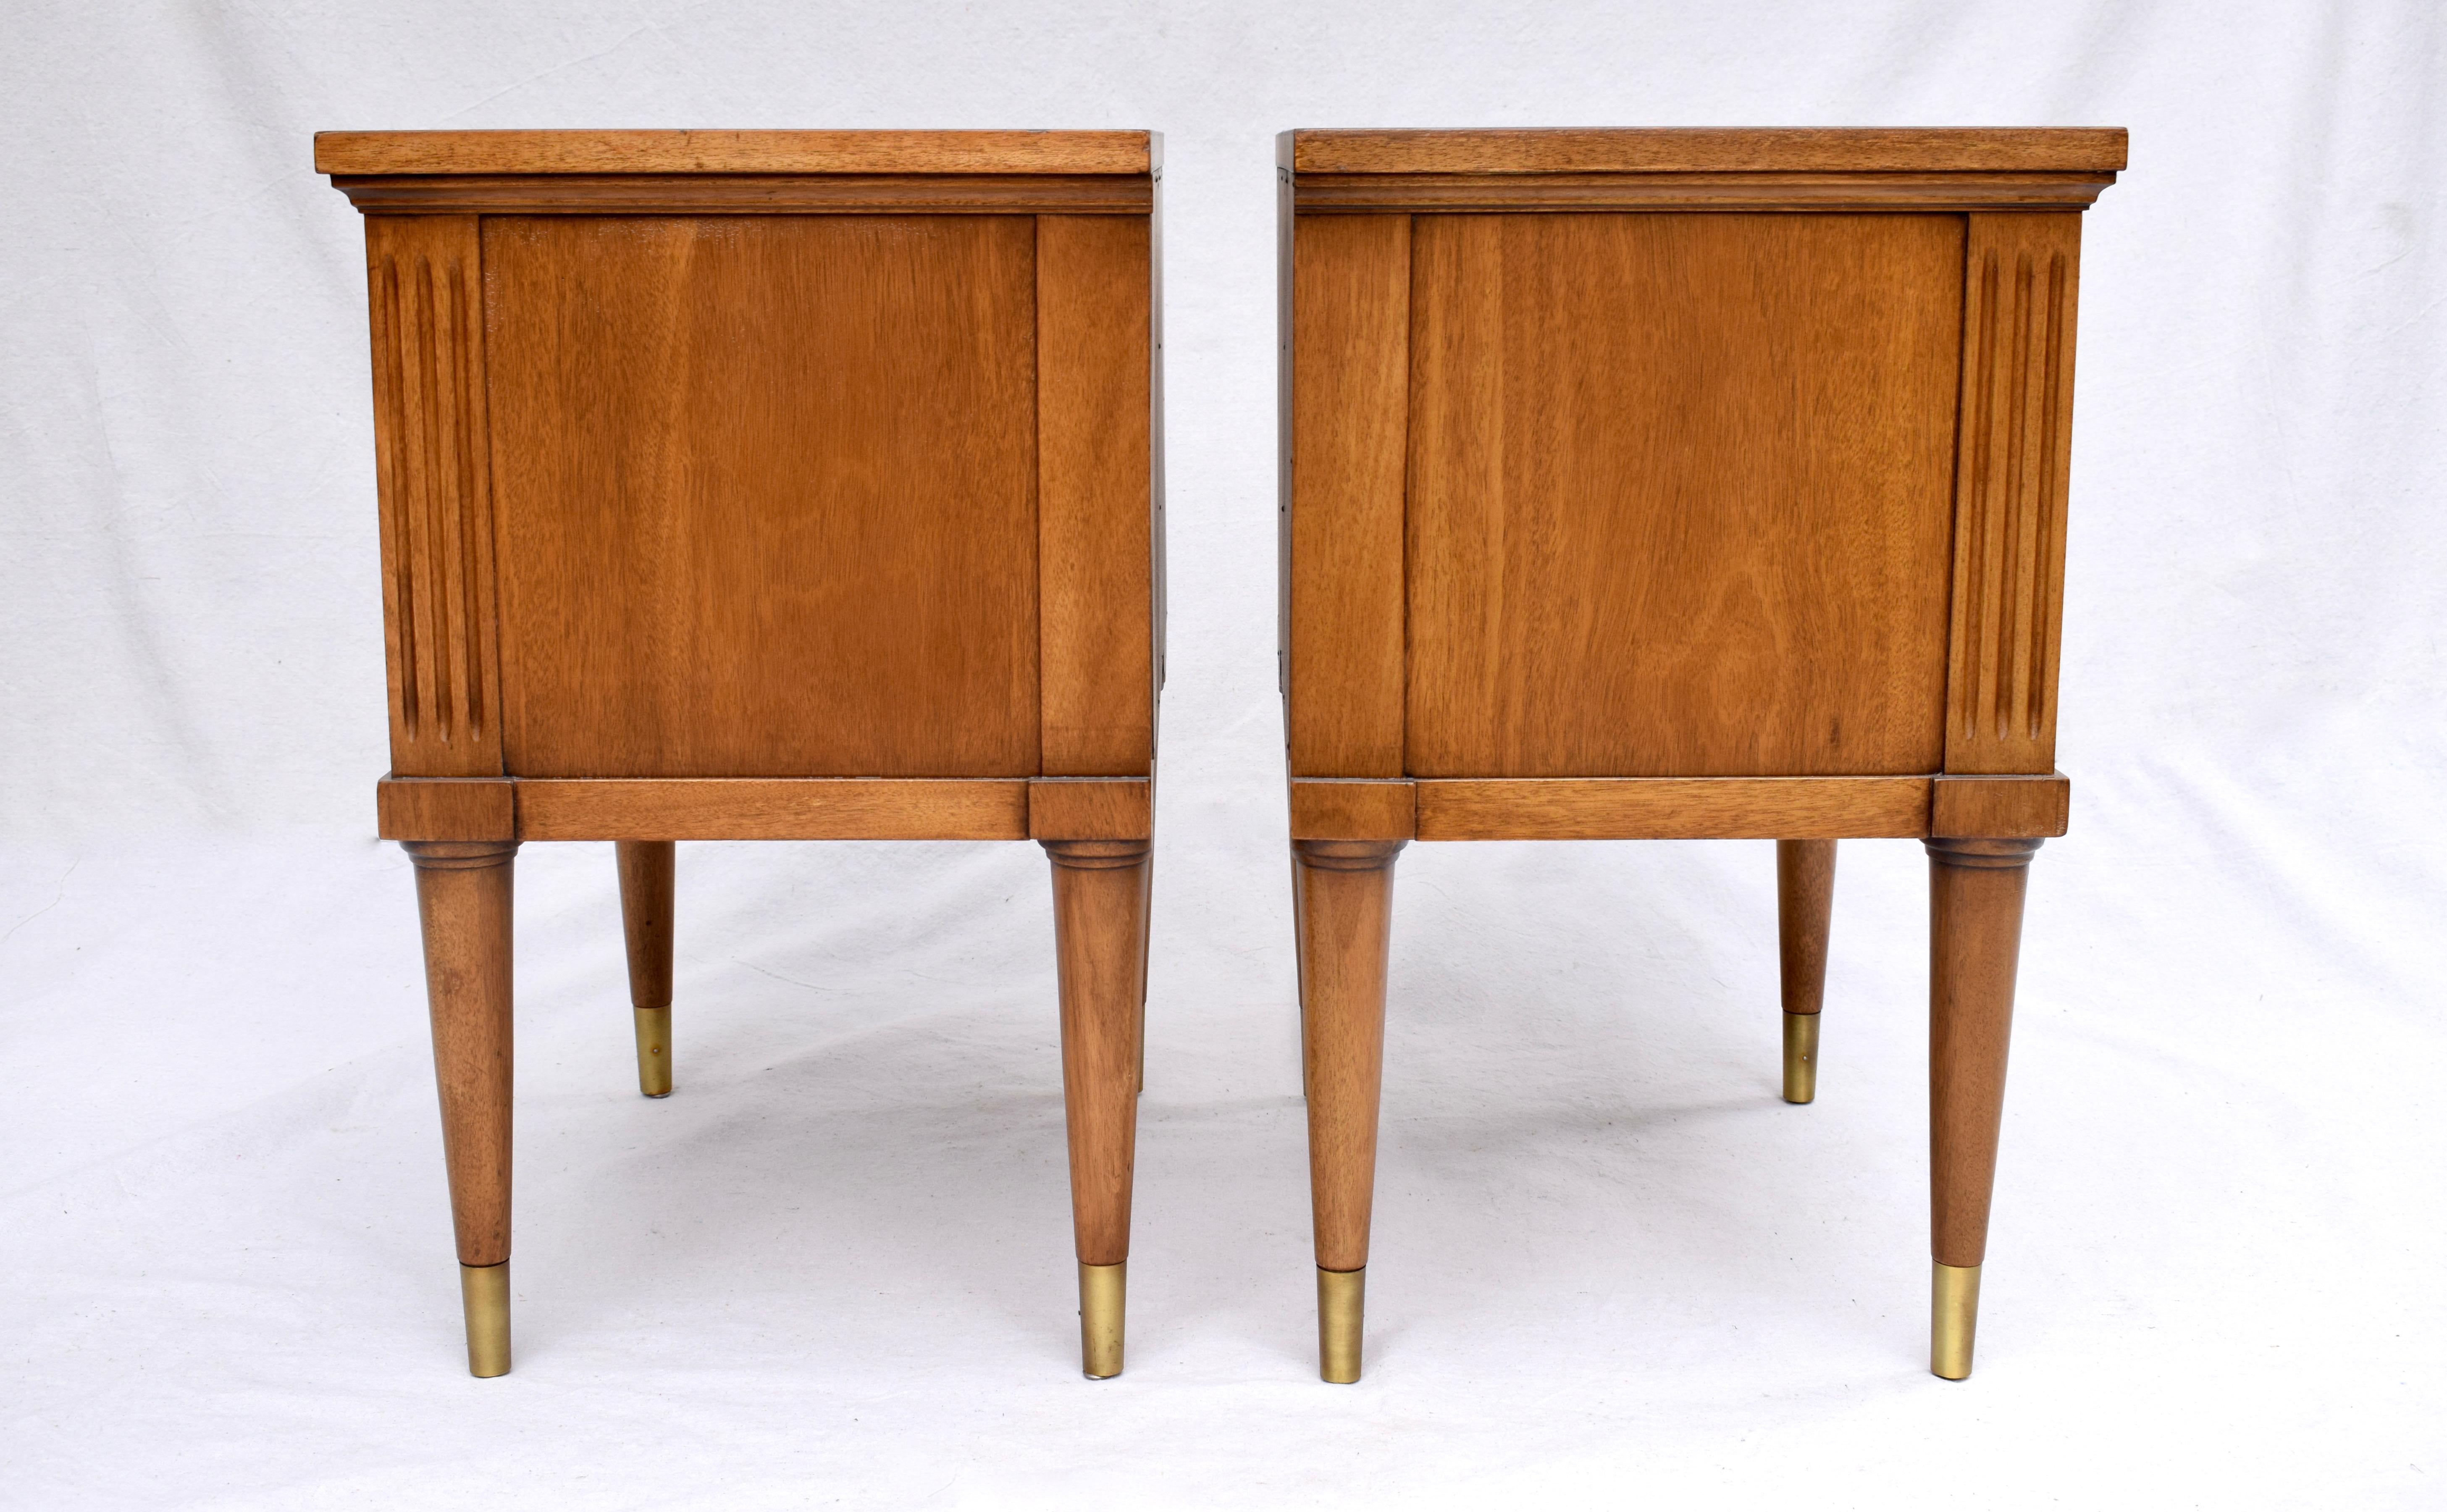 Neoclassical Pair of Petite French Directoire Style Commodes or Nightstands